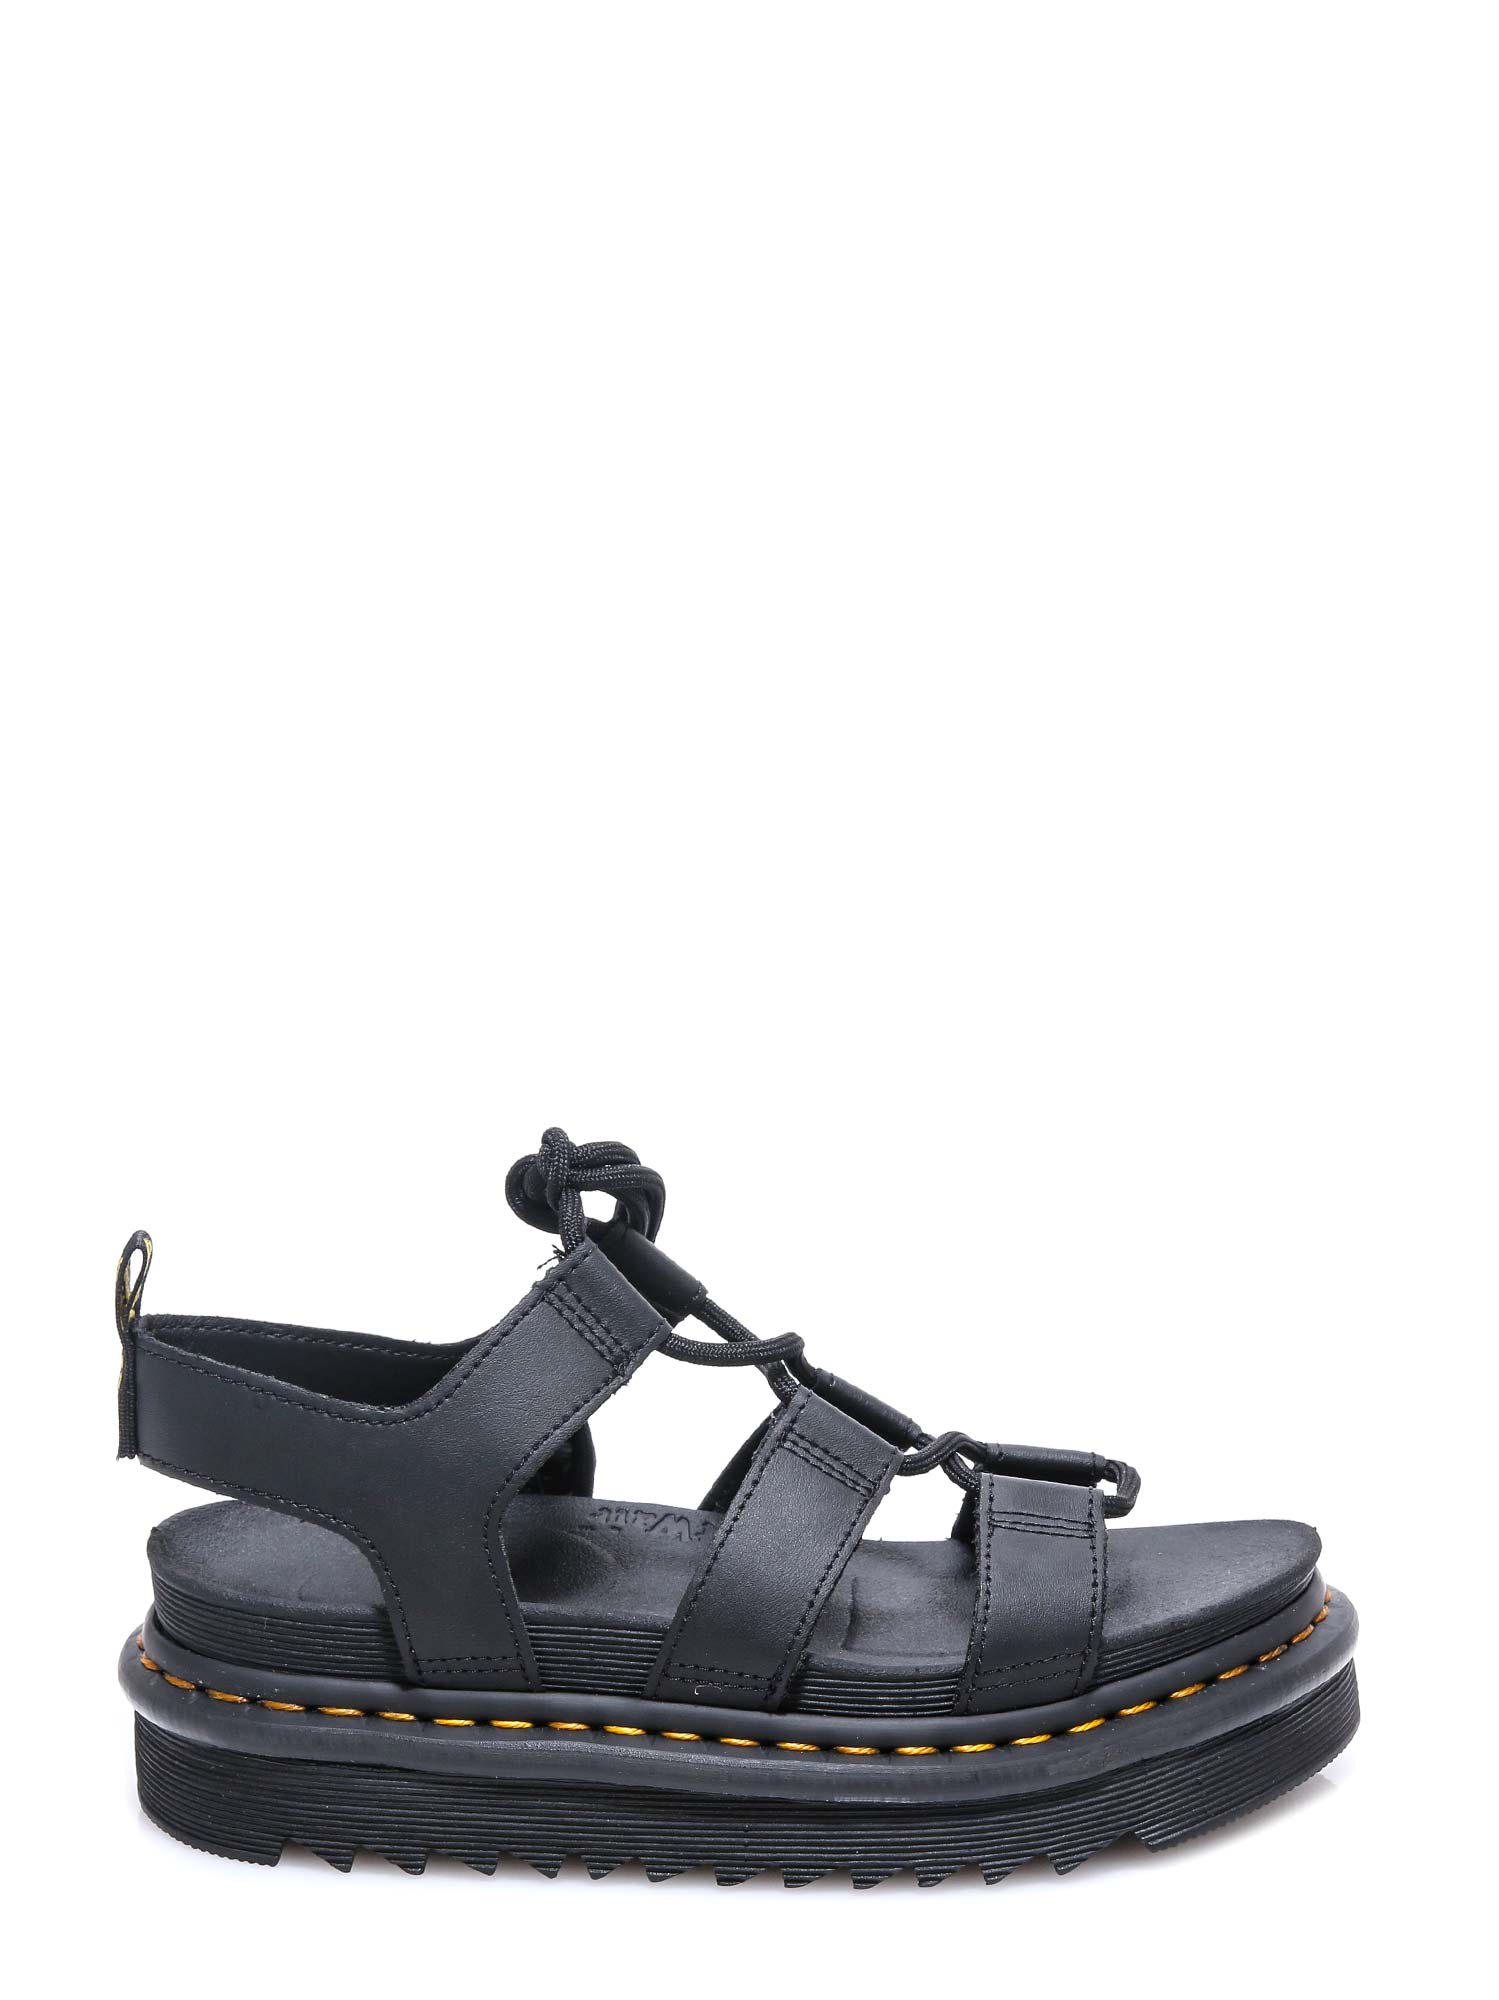 Buy Dr. Martens Nartilla Sandals online, shop Dr. Martens shoes with free shipping